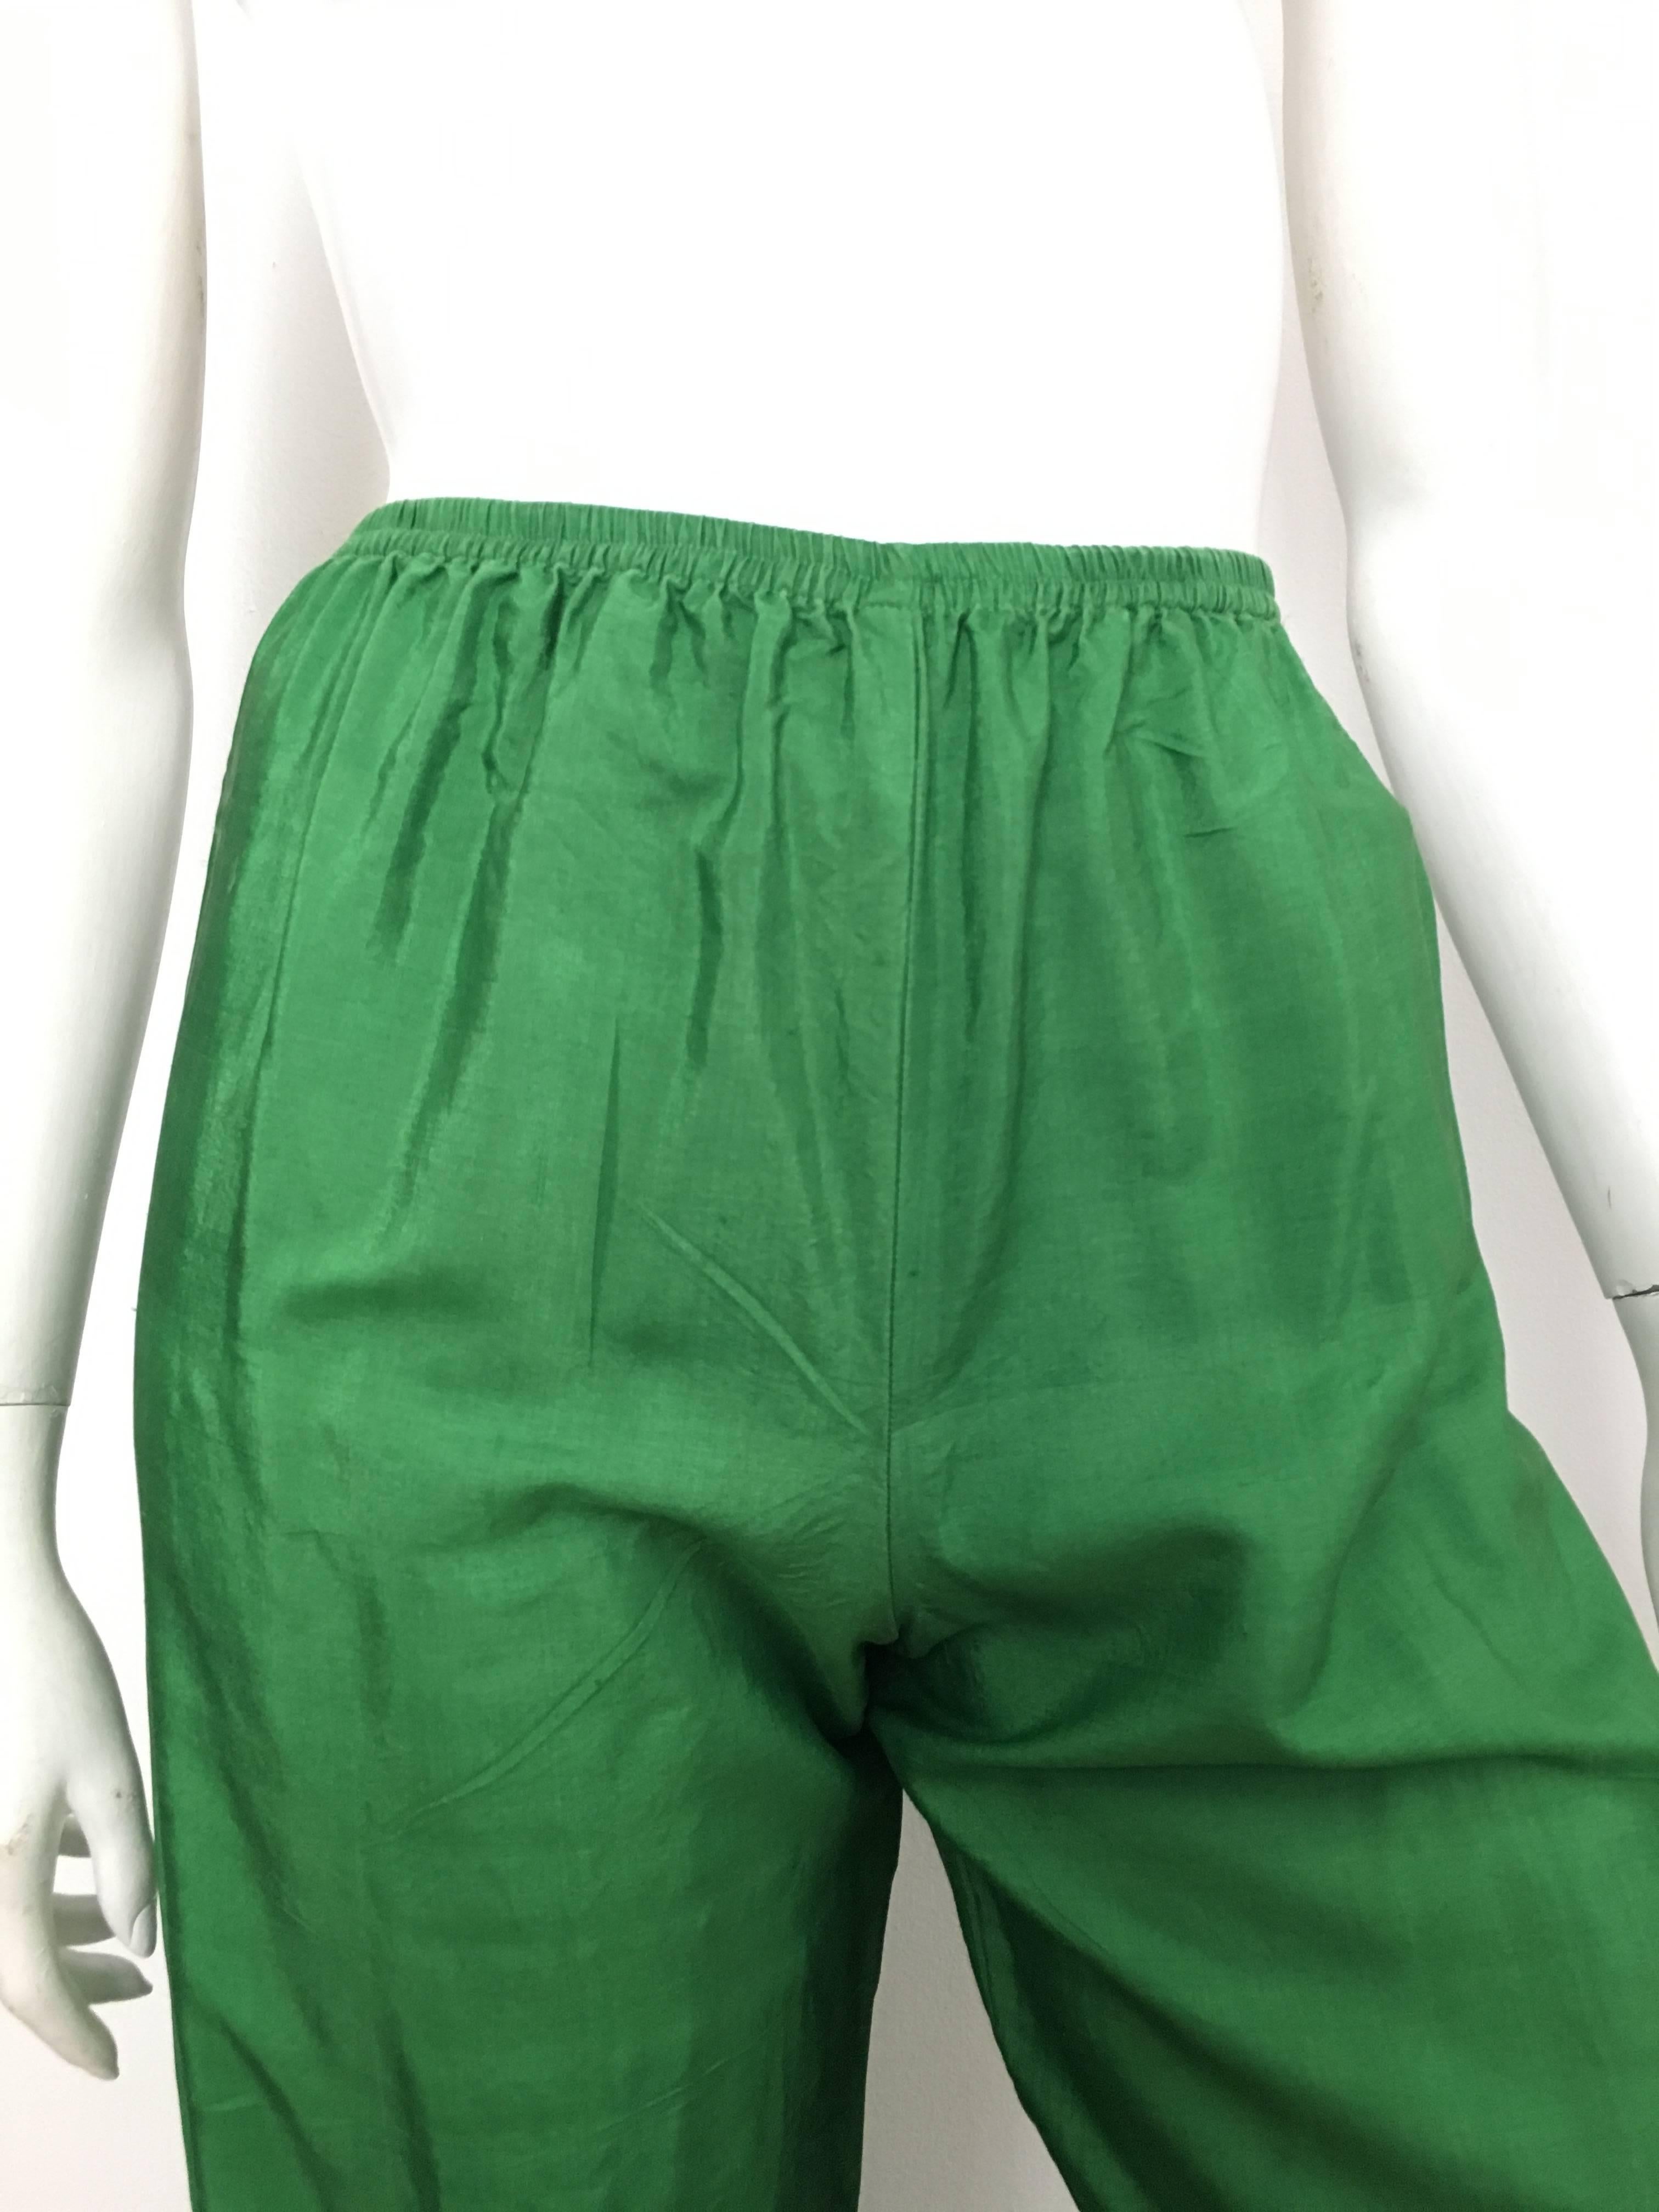 Saint Laurent Rive Gauche 1970s green silk pants with elastic waist band is a French size 36 and fits an USA size 4.  These pants were purchased in Paris at the YSL boutique from my client who was there for a modeling assignment during the late